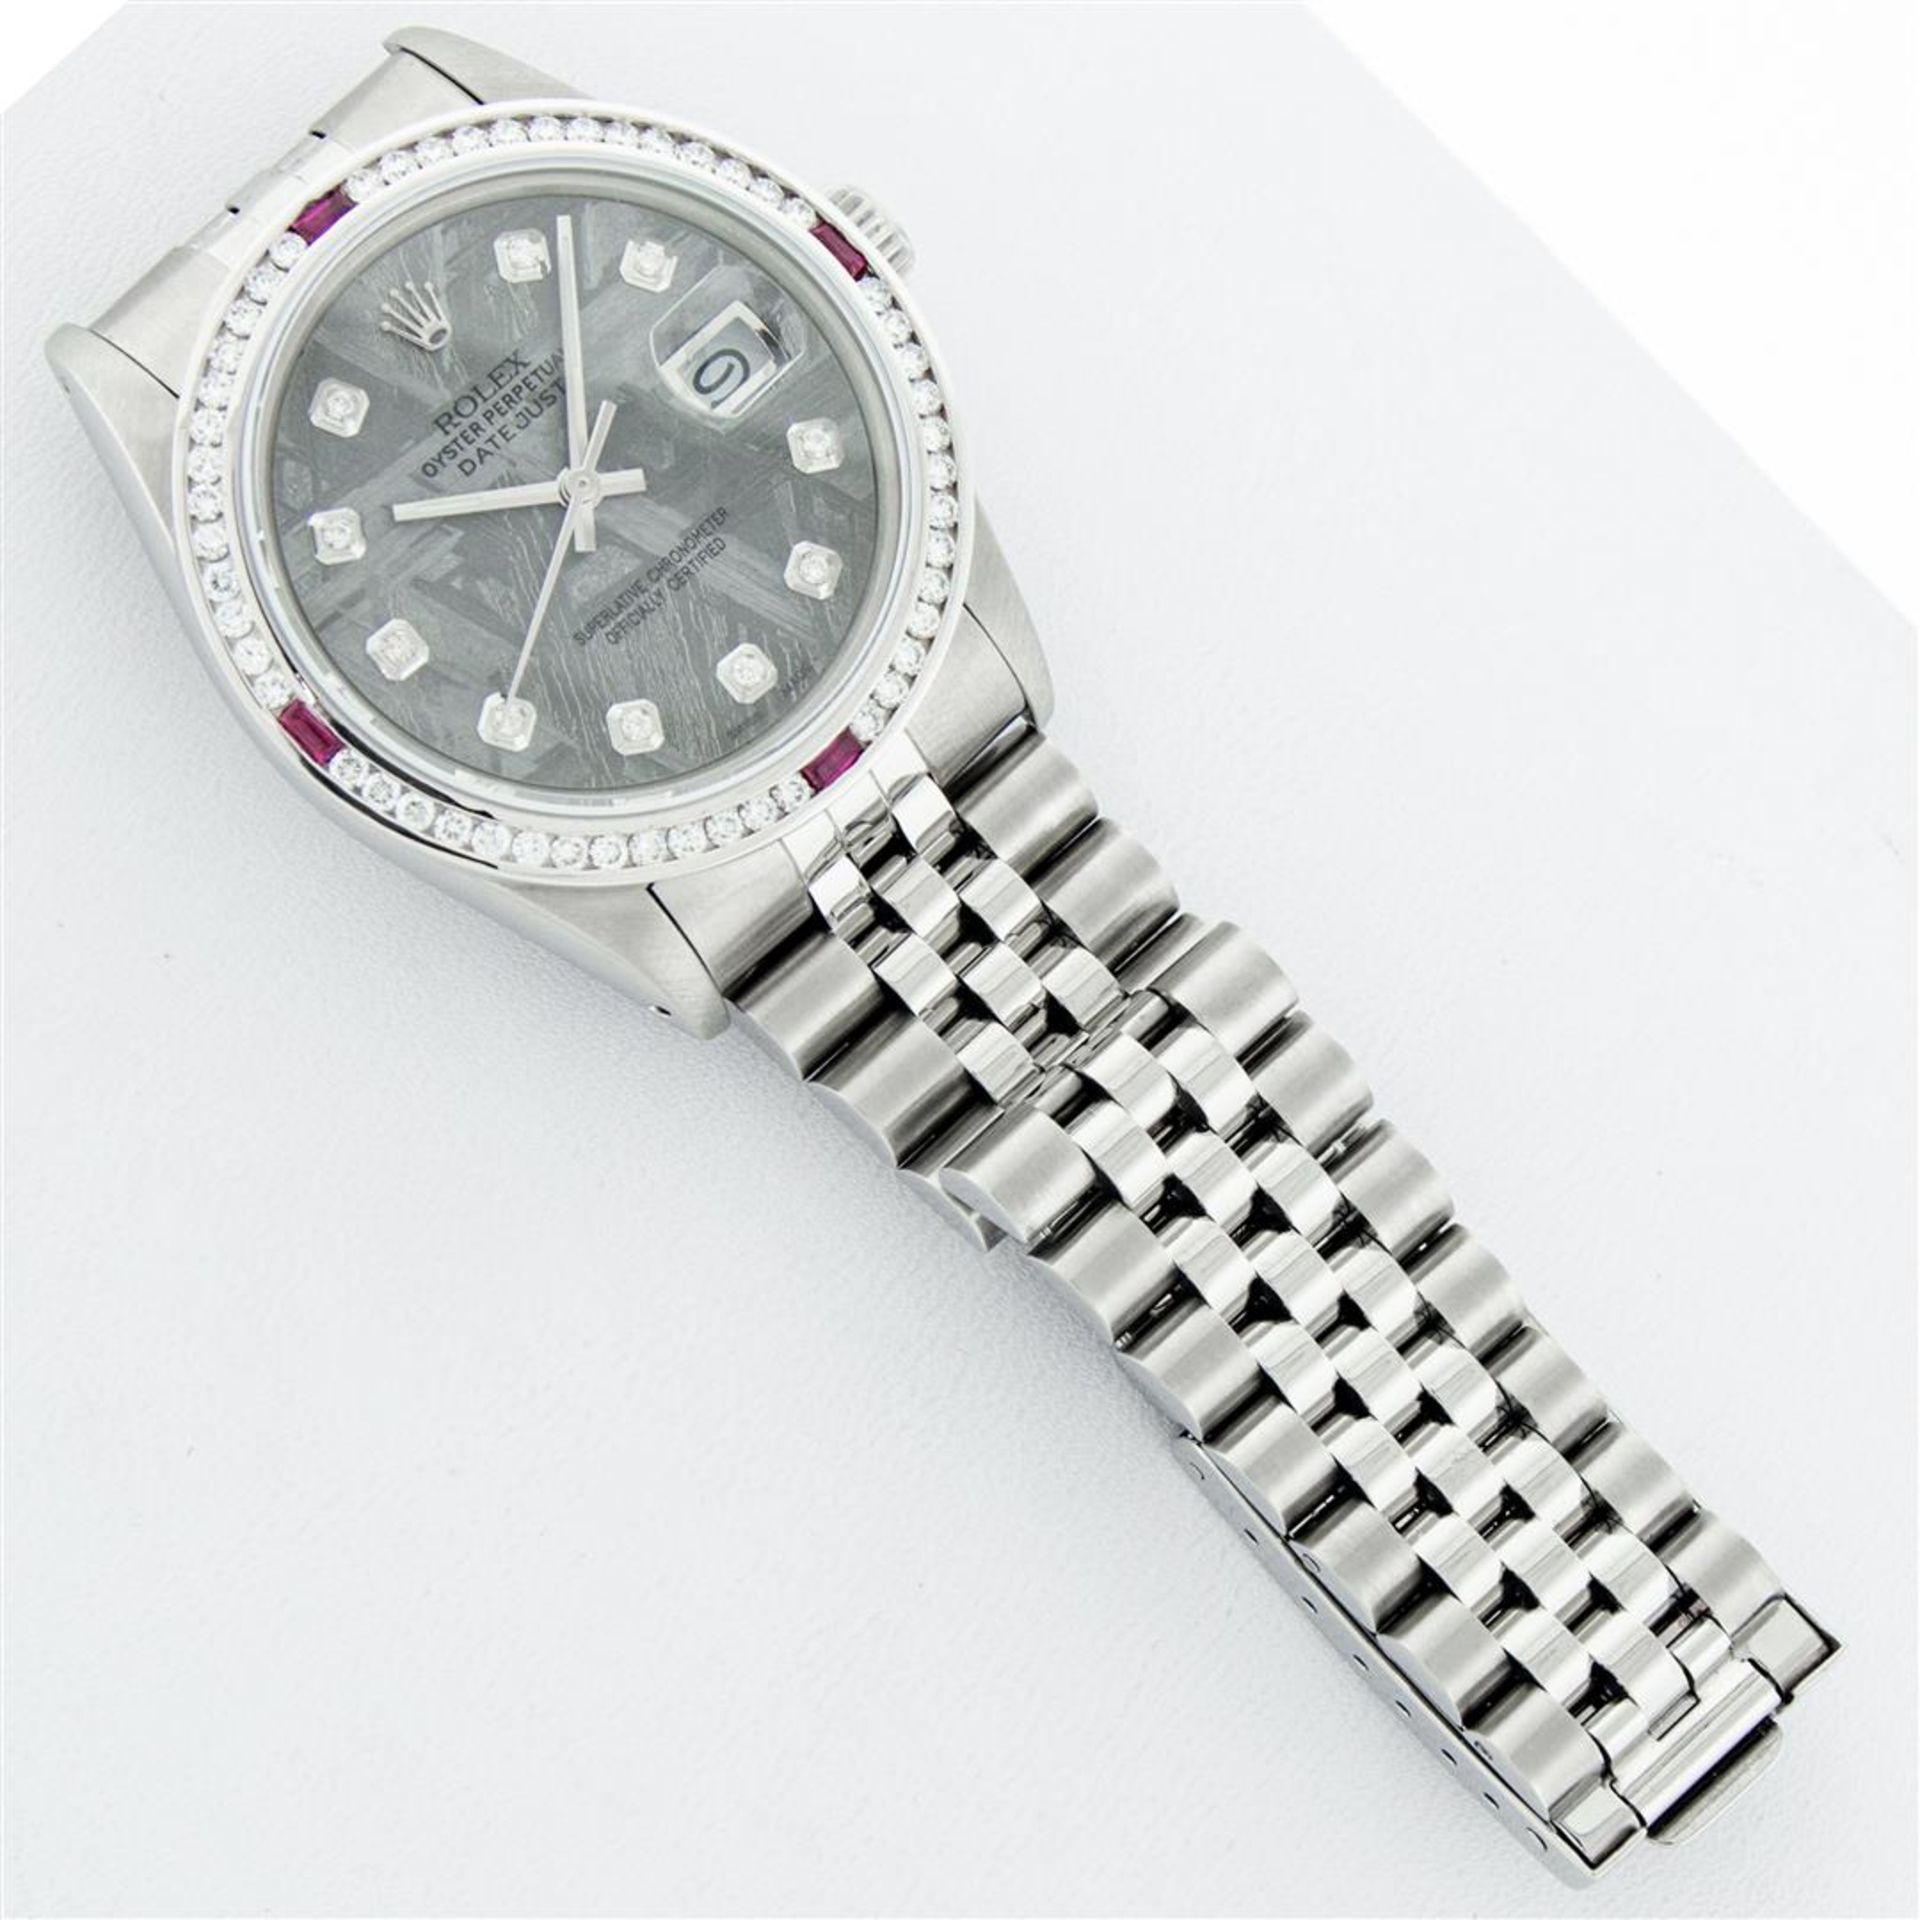 Rolex Mens SS Meteorite Diamond & Ruby Channel Set Oyster Perpetual Datejust Wri - Image 7 of 9